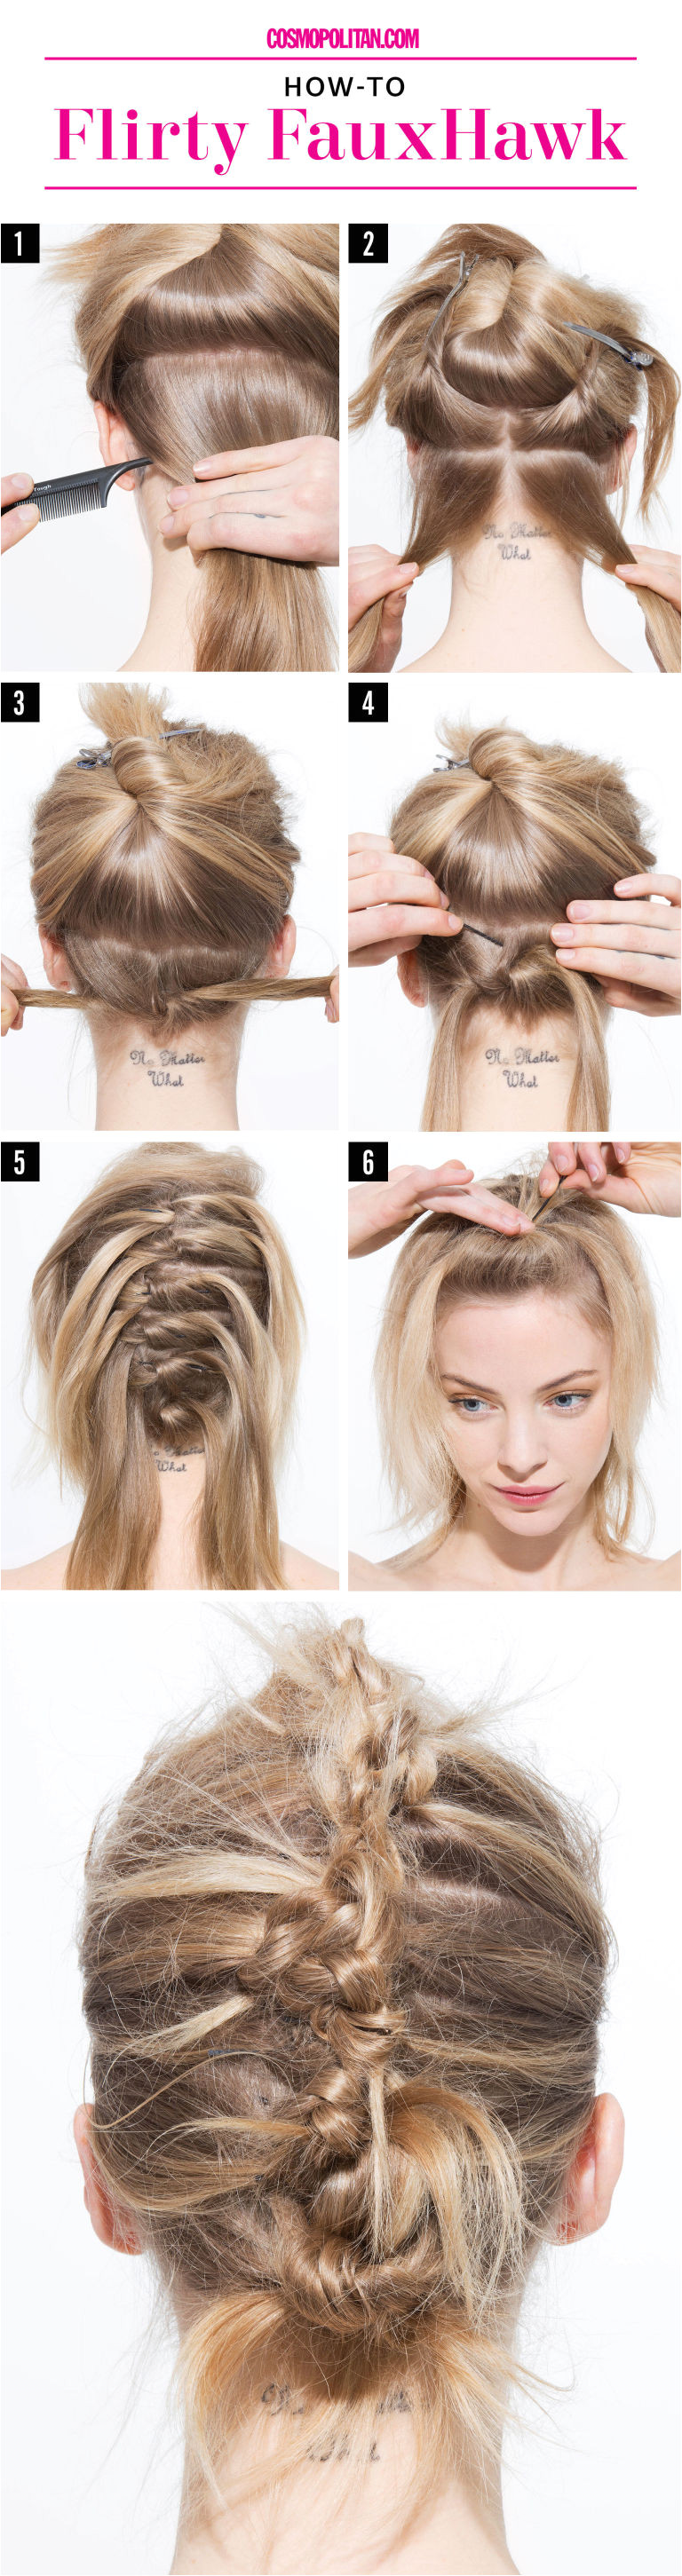 Cute Hairstyles In 30 Minutes 4 Last Minute Diy evening Hairstyles that Will Leave You Looking Hot